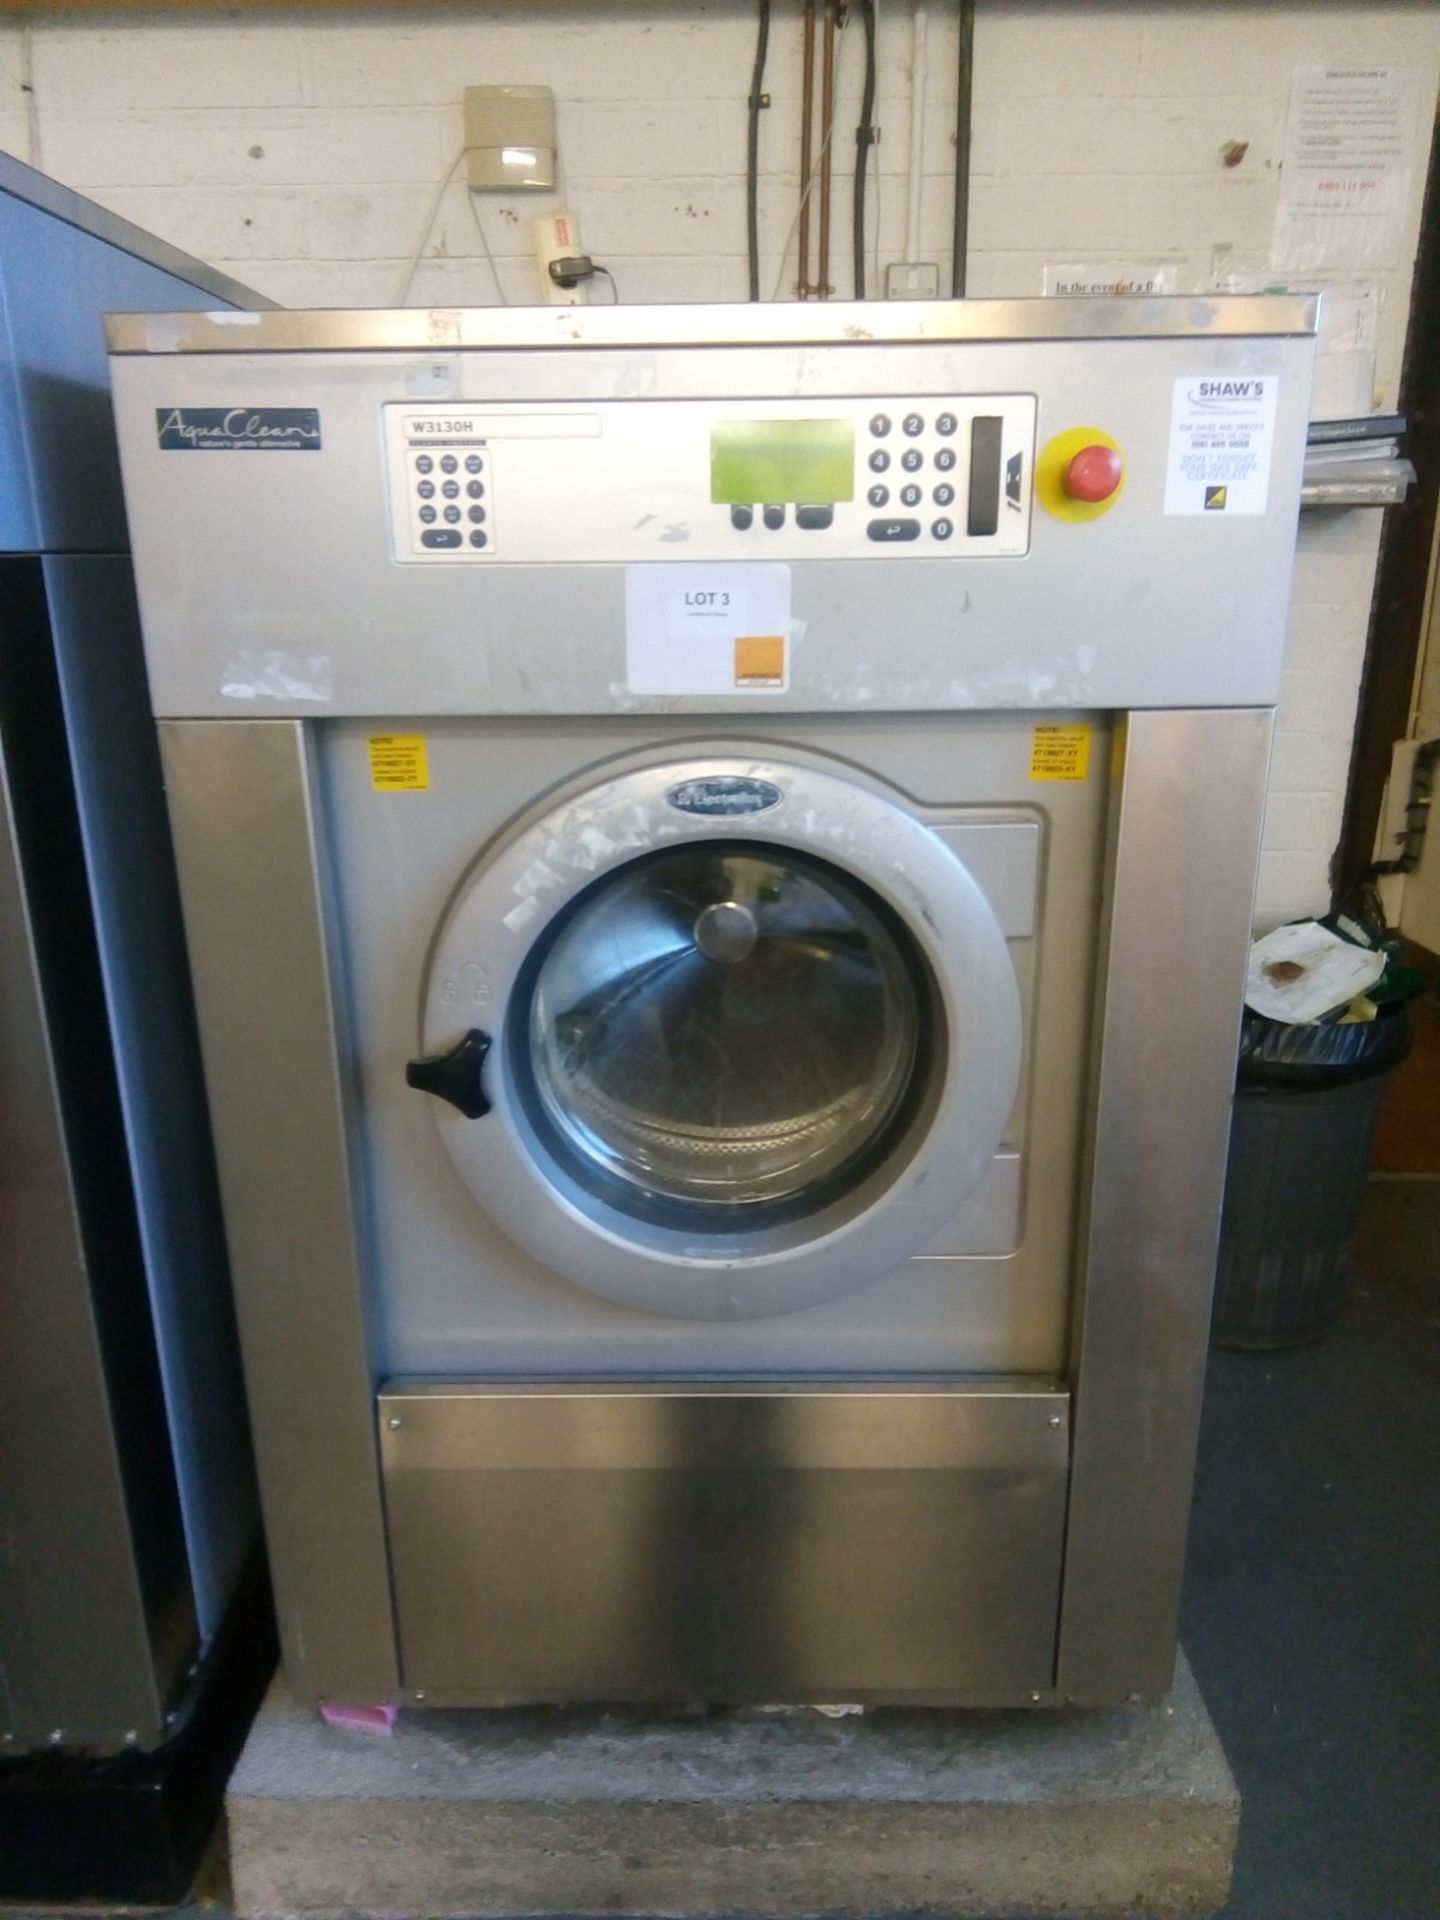 ELECTROLUX W3130H commercial washing machine. Serial no. 00650/0017292 - 3 phase